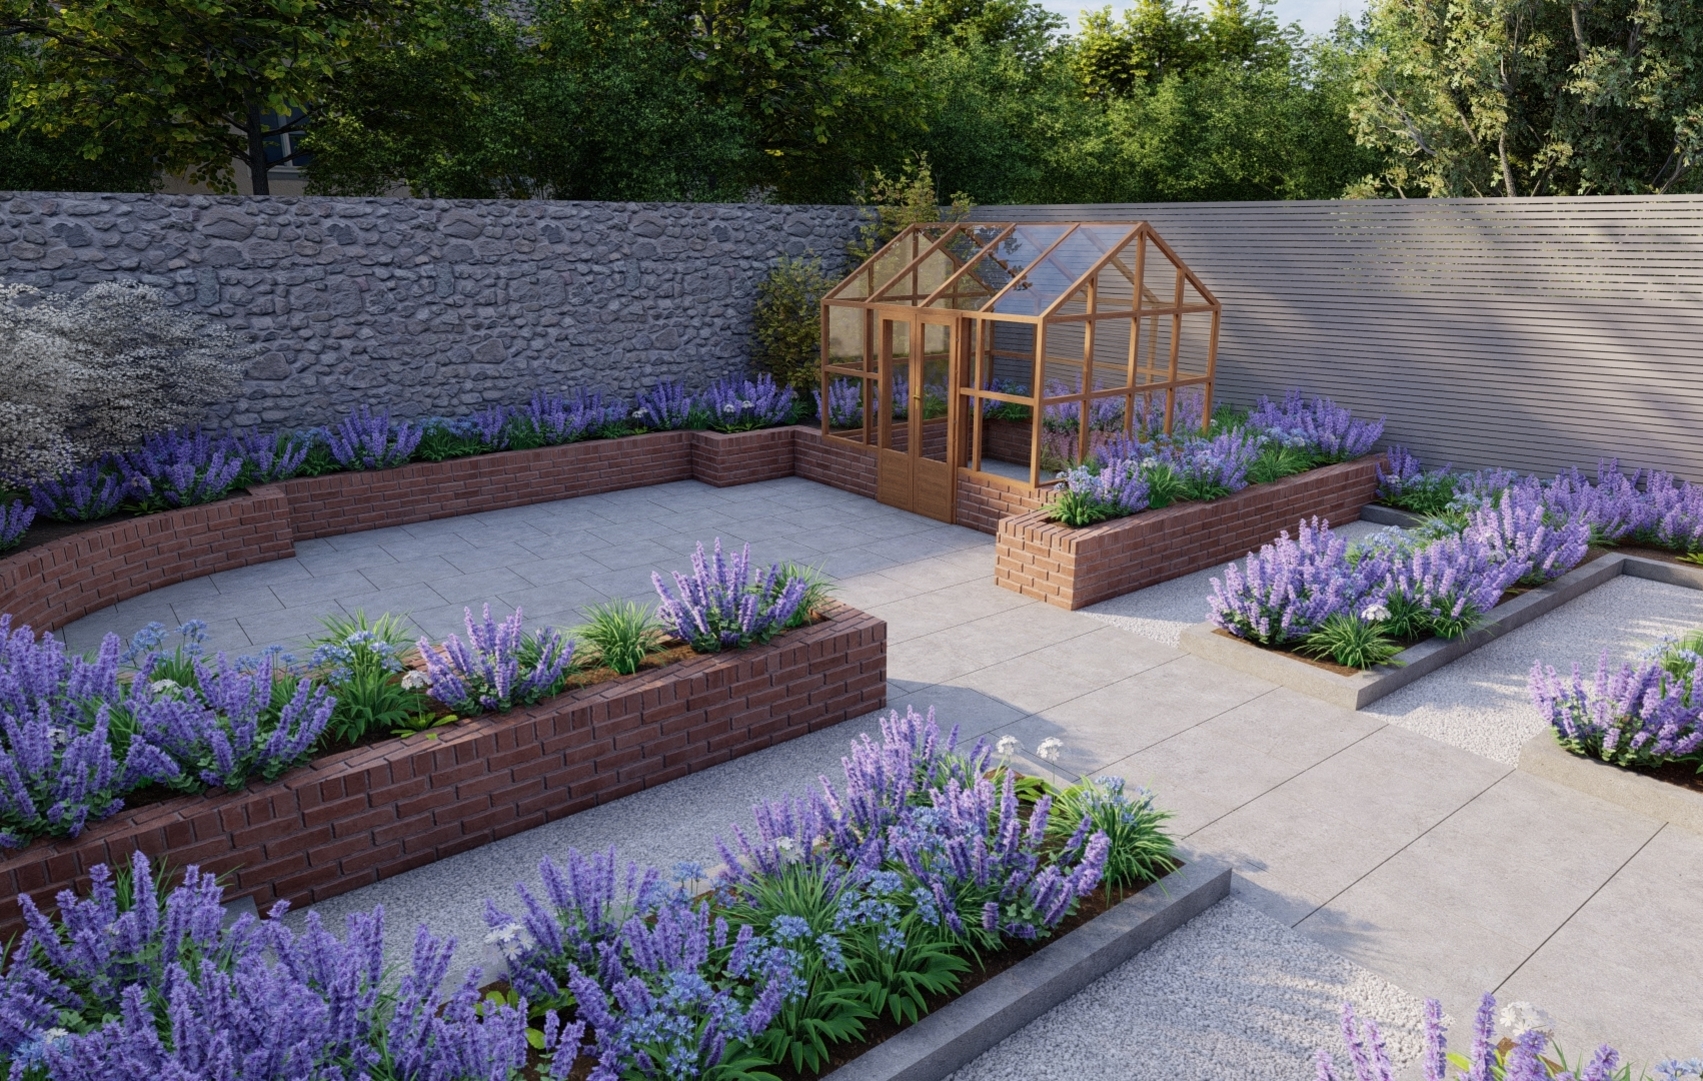 Garden Design Churchtown |growing beds for edibles, ornamentals & cut flowers with Gabriel Ash Classic Planthouse Family Garden in Dublin 14